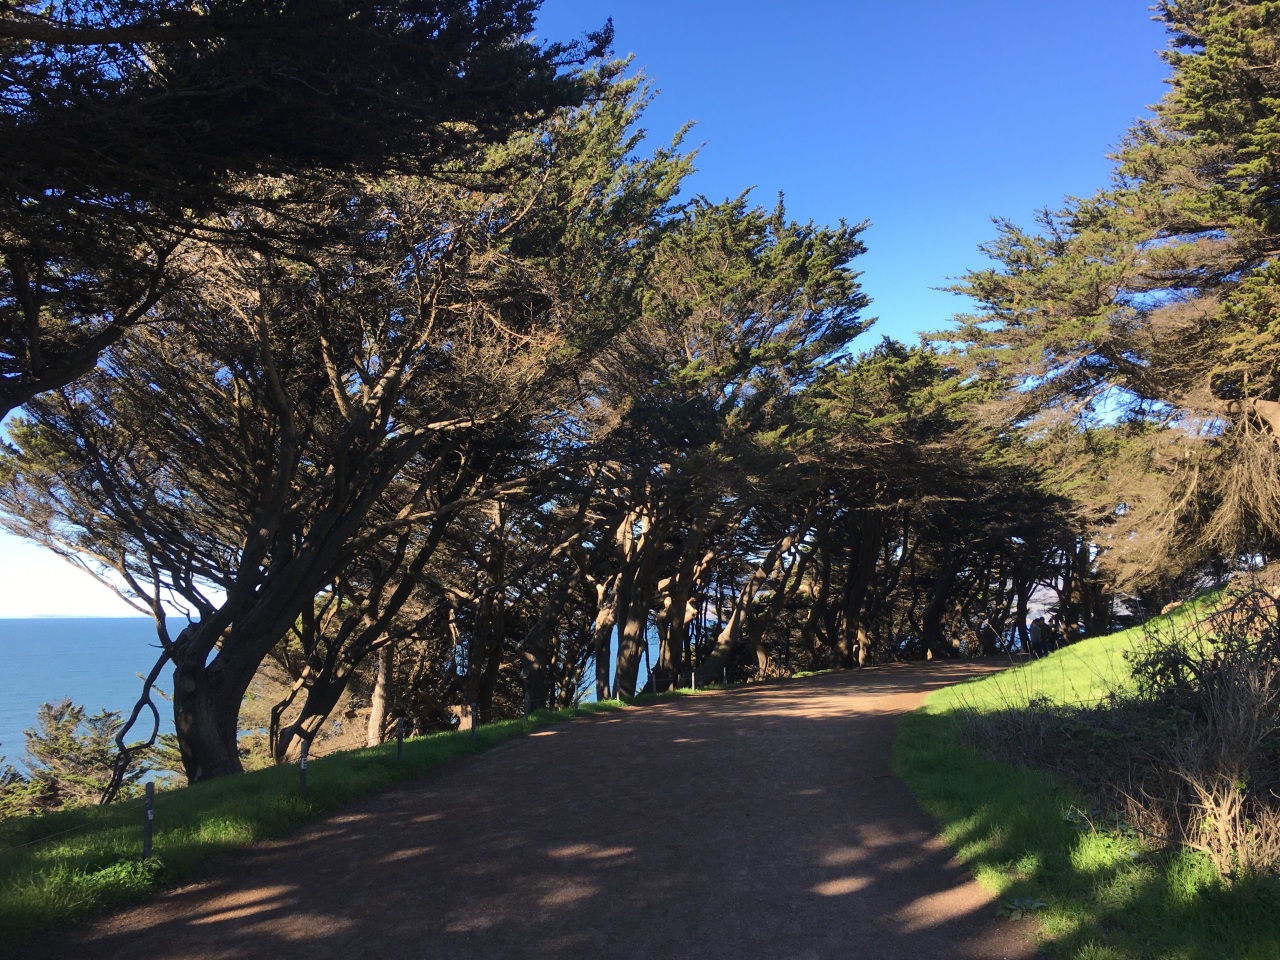 Land's End Trail Photos and Tips, San Francisco